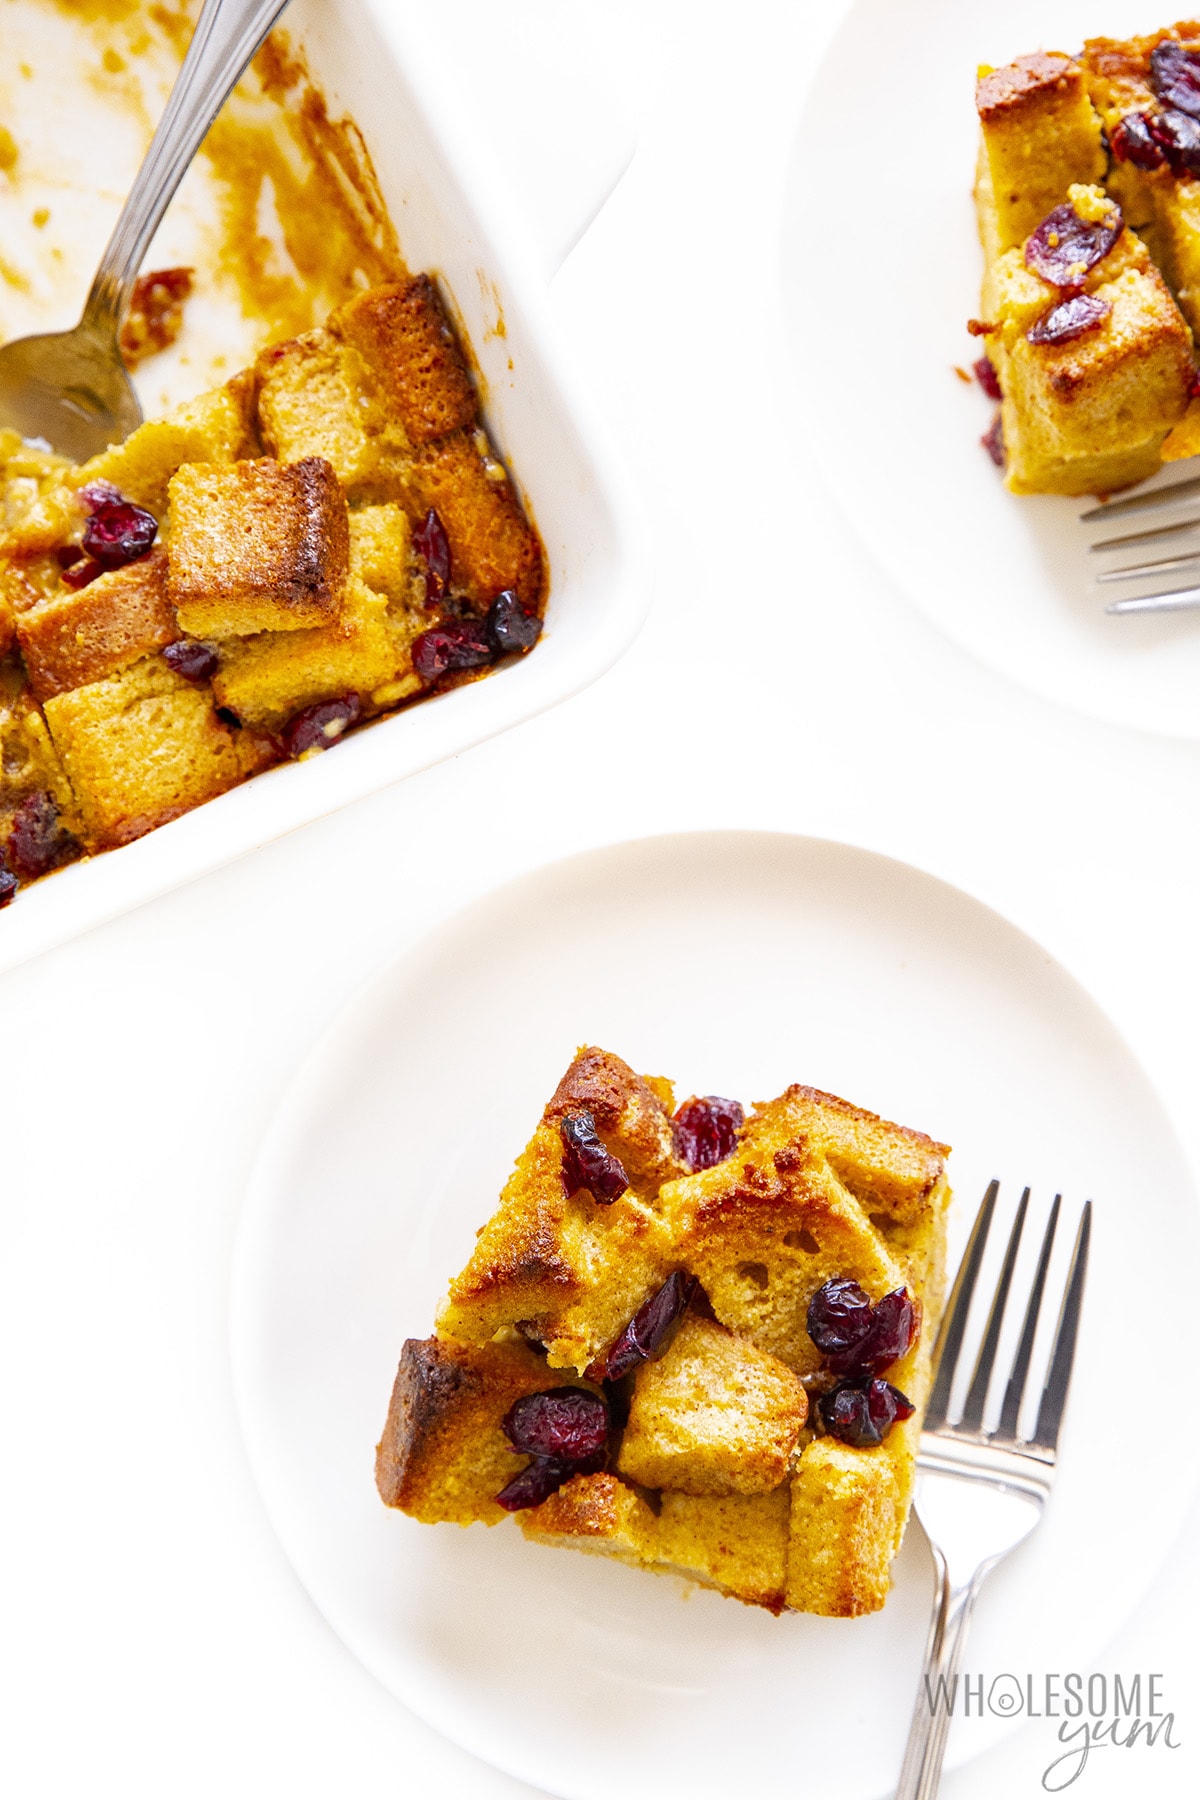 Serve the keto bread pudding on a plate with a fork next to the baking sheet.